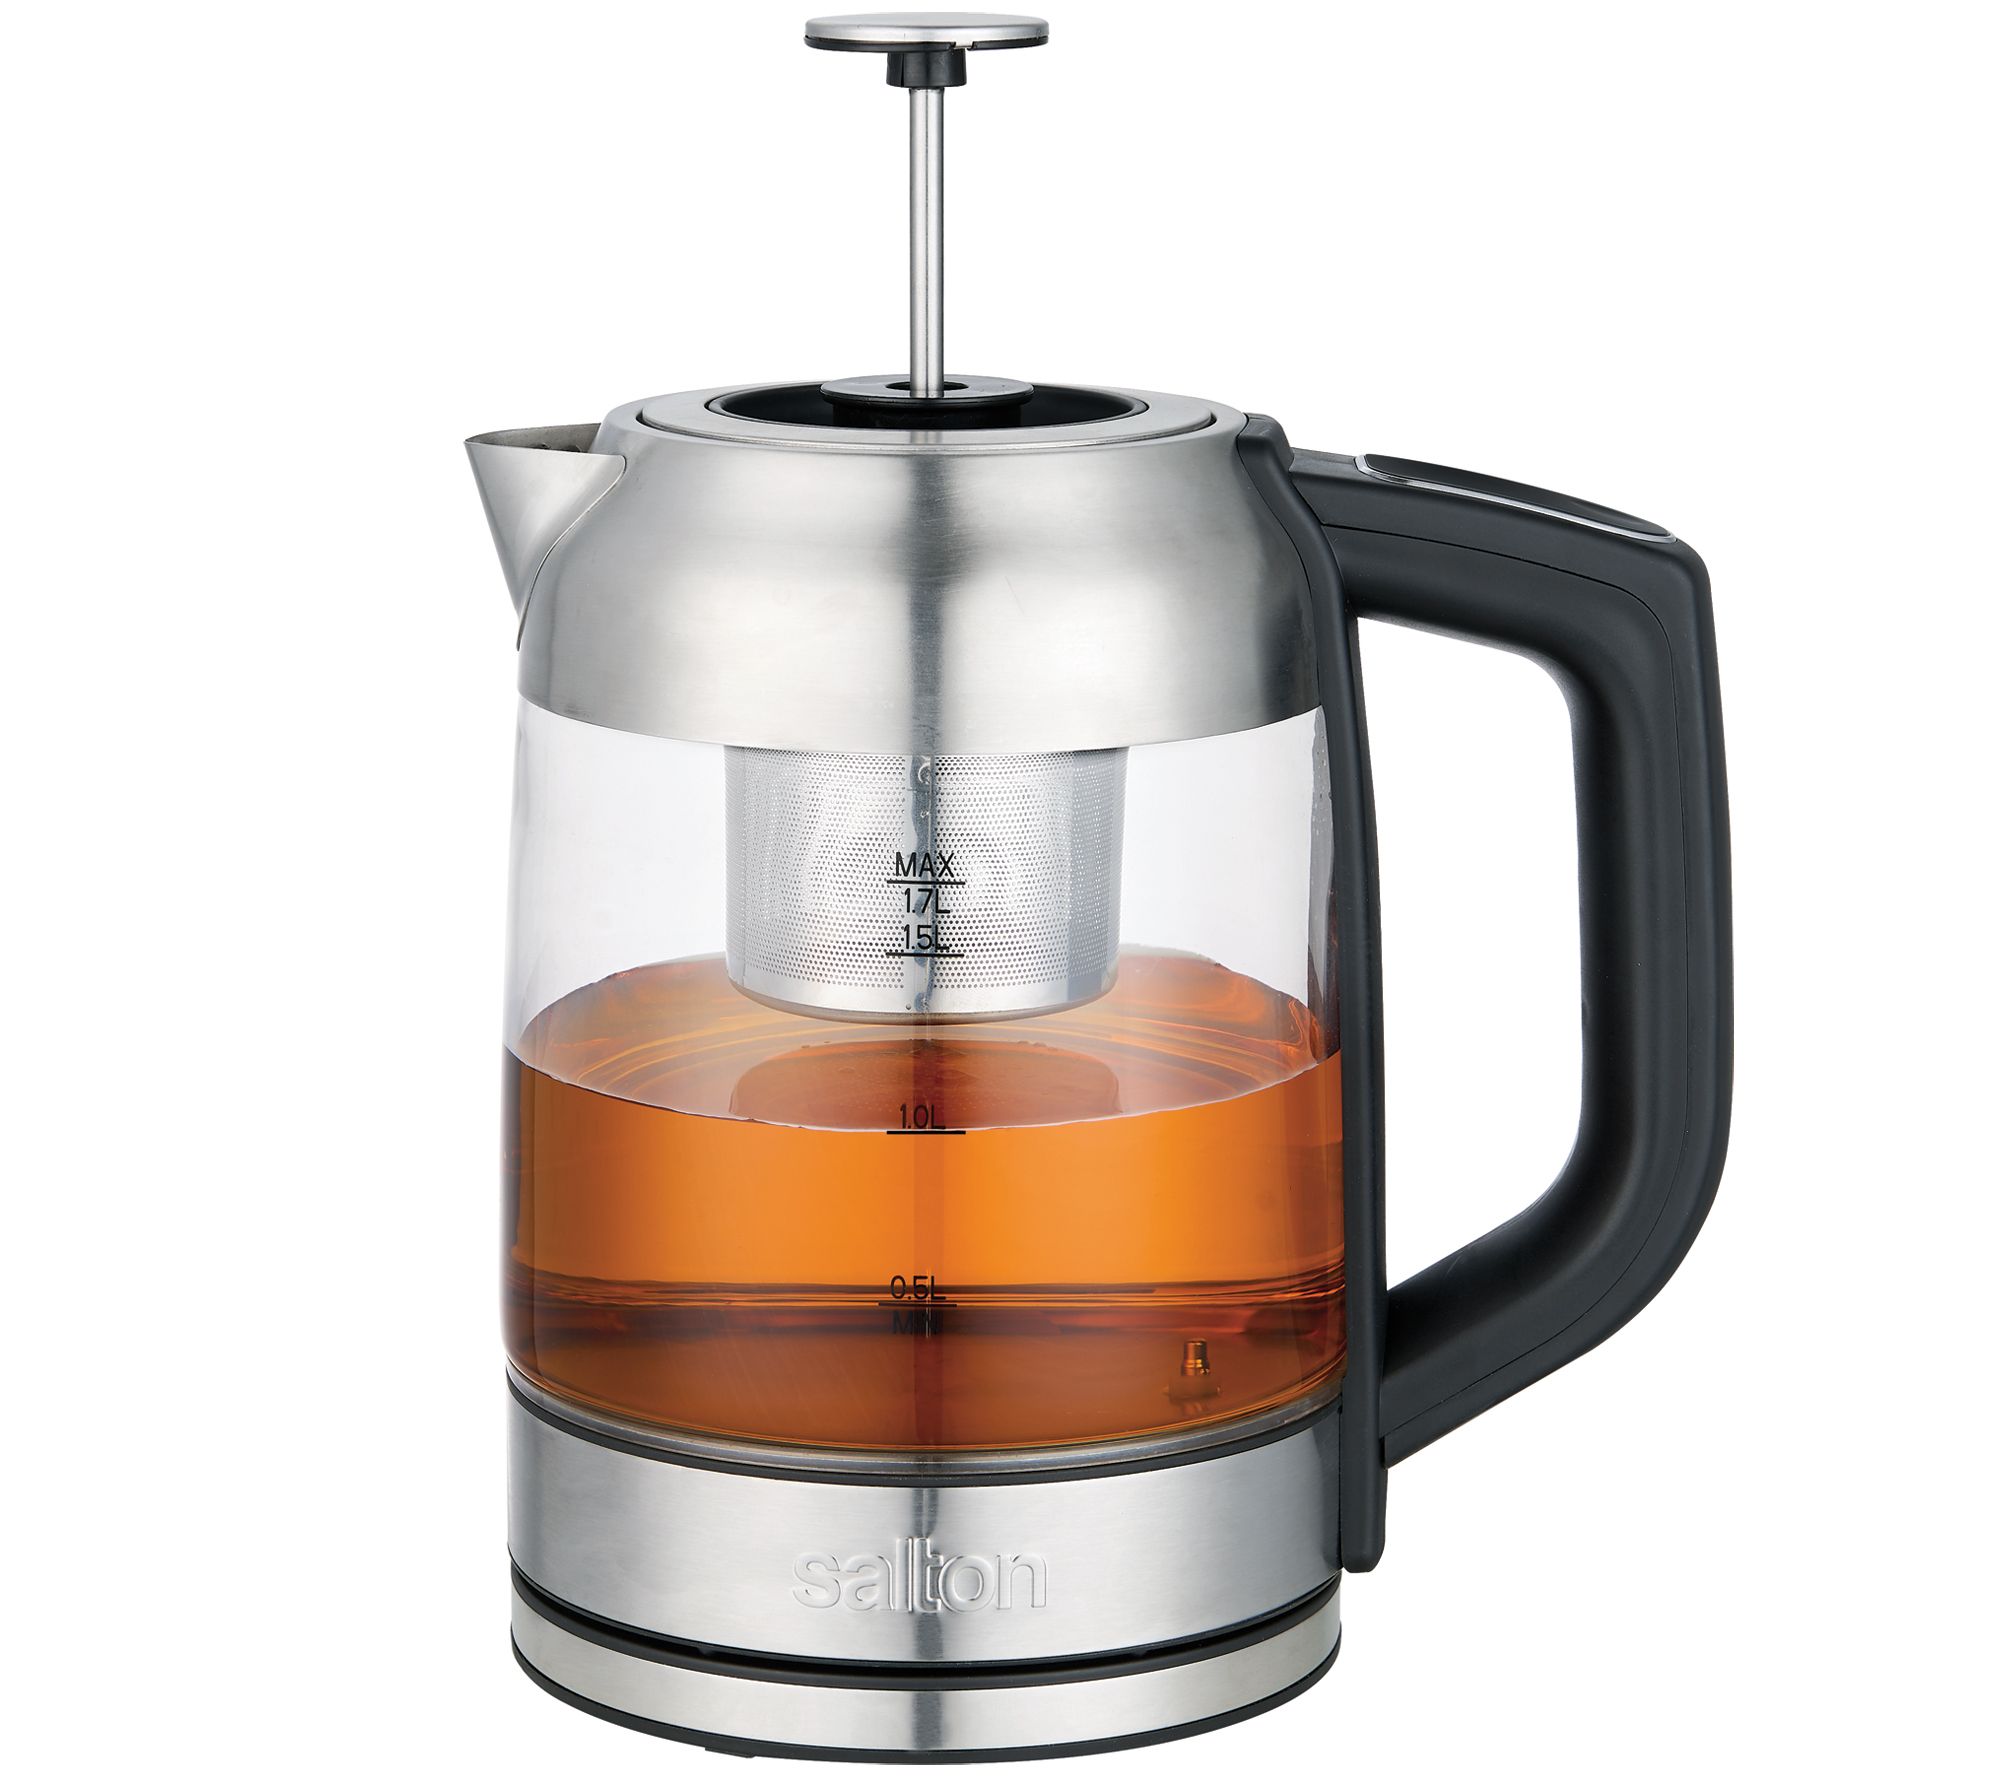 Cordless Electric Glass Kettle I Chef'sChoice Model 680 - Chef's